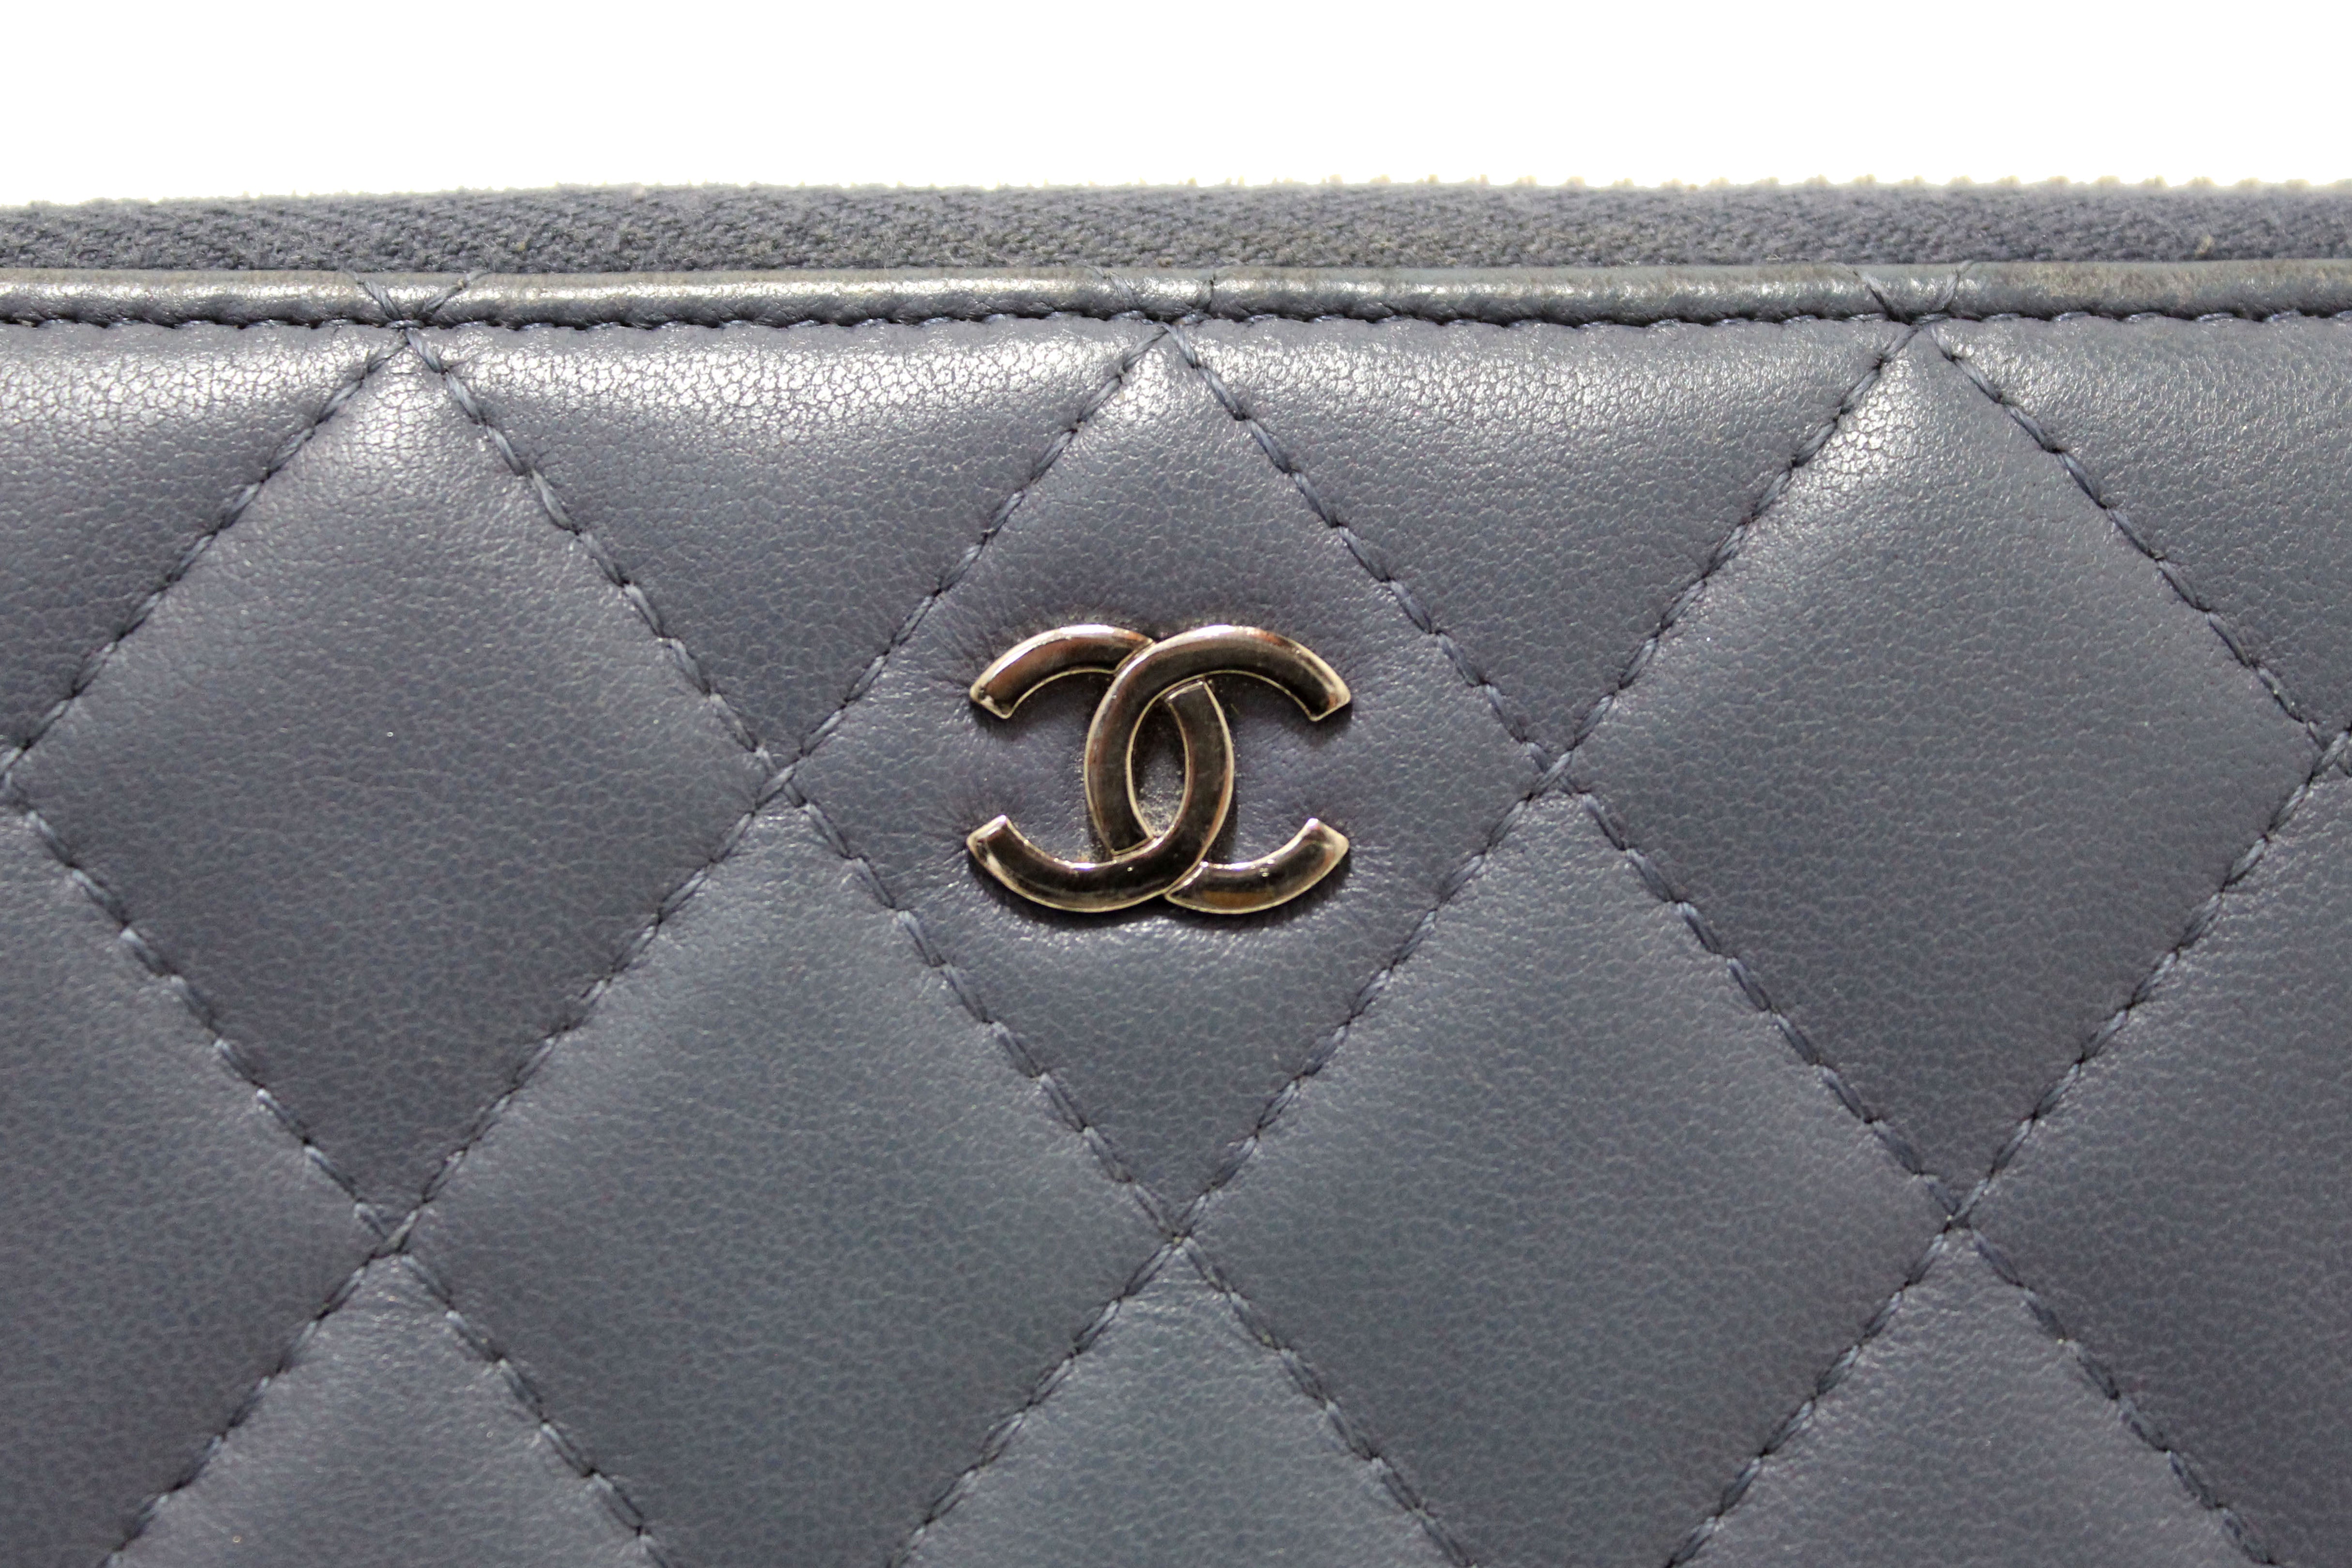 Authentic Chanel Blue Quilted Lambskin Leather Zippy Wallet